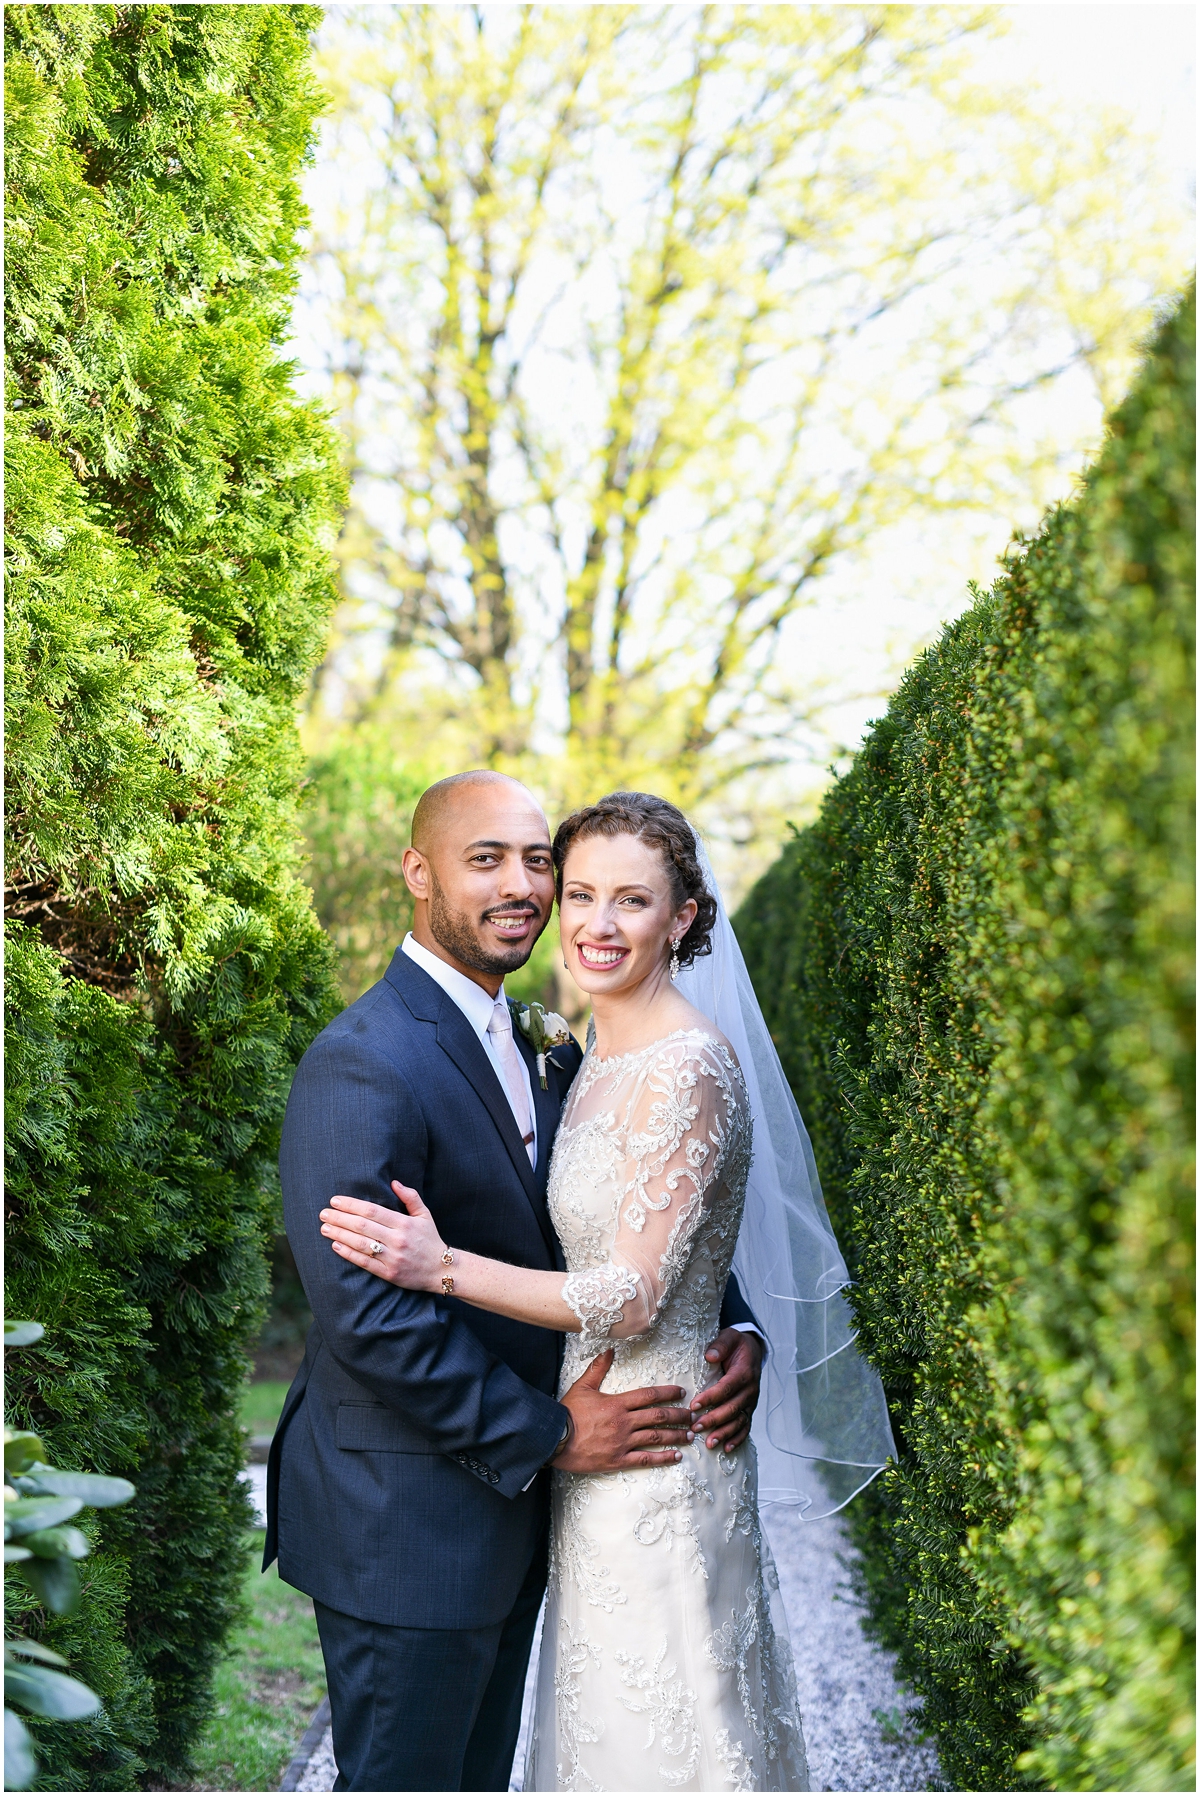 Multicultural wedding photographer in DC and San Antonio, TX